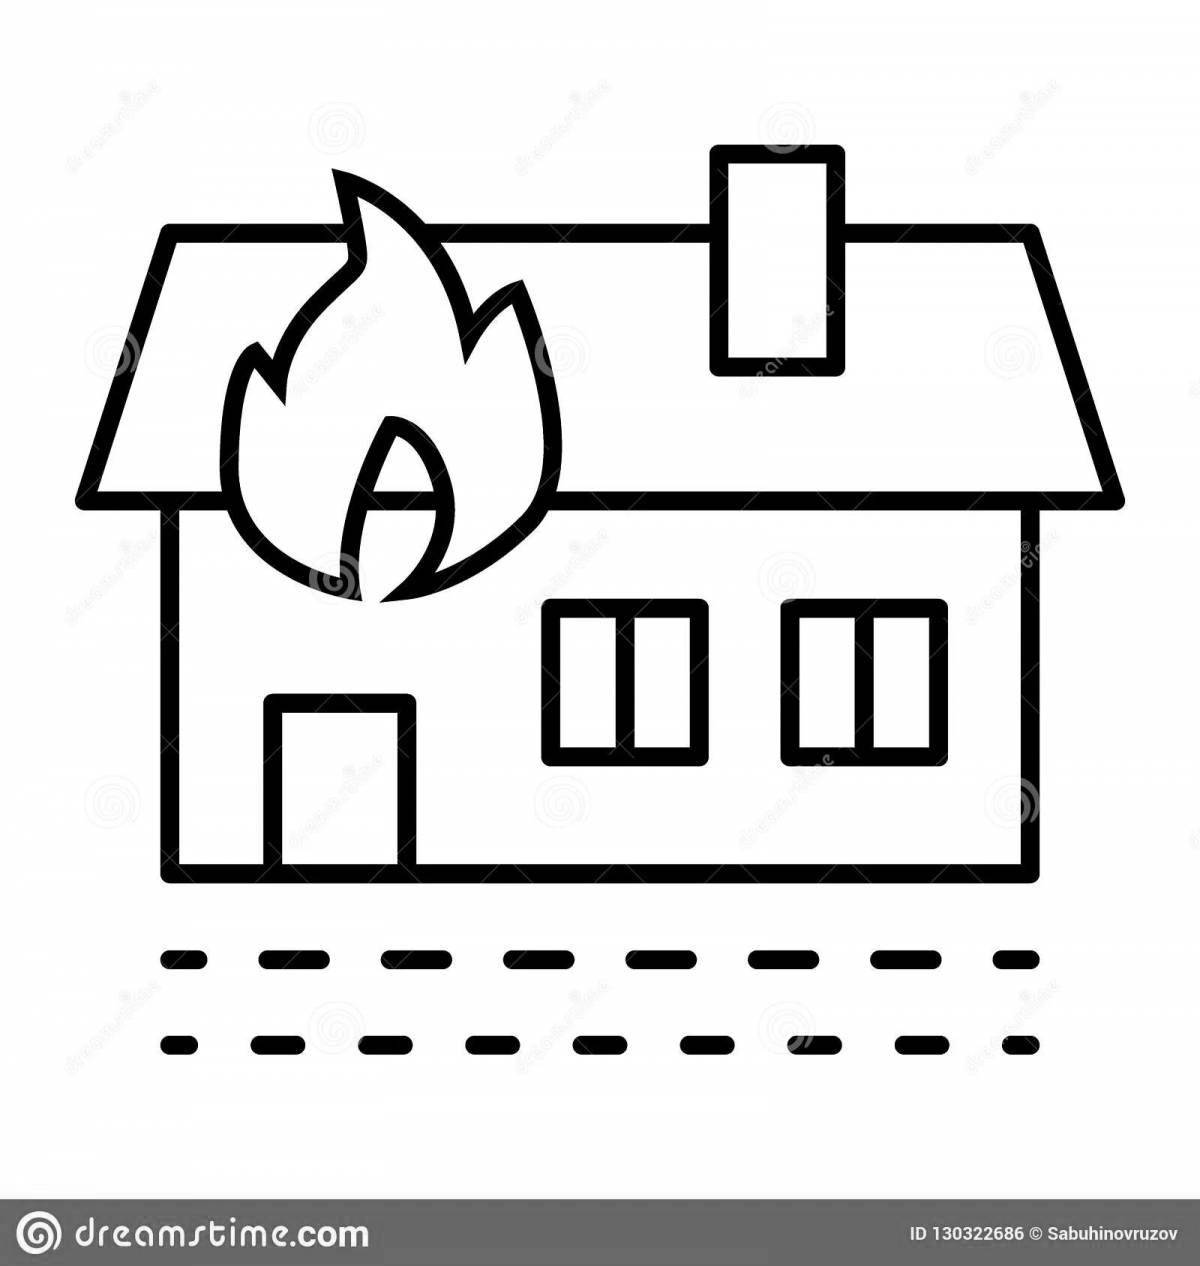 Amazing cat house coloring page for toddlers